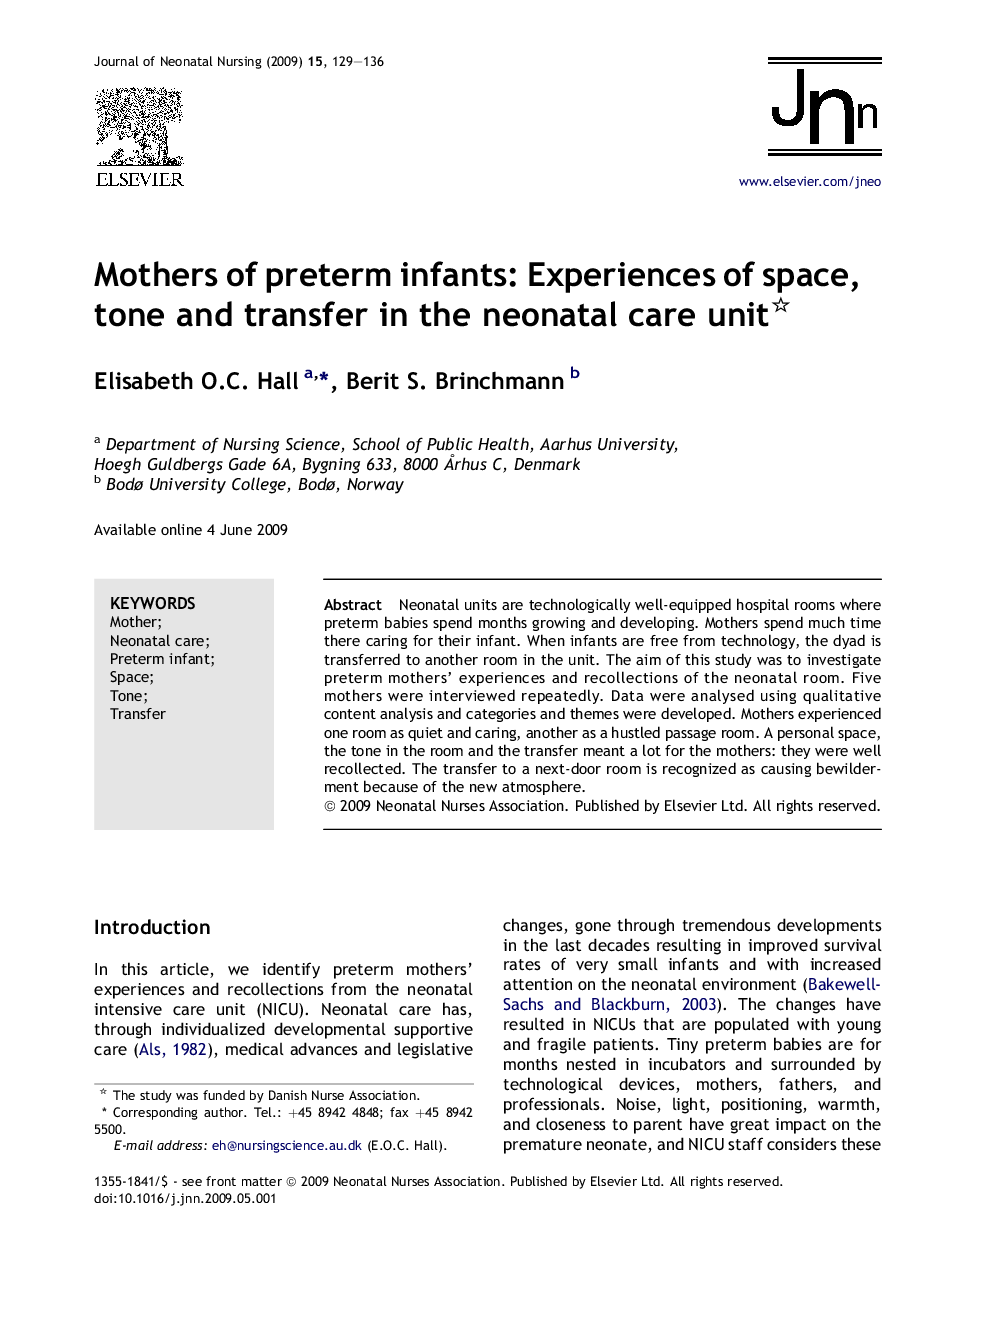 Mothers of preterm infants: Experiences of space, tone and transfer in the neonatal care unit 